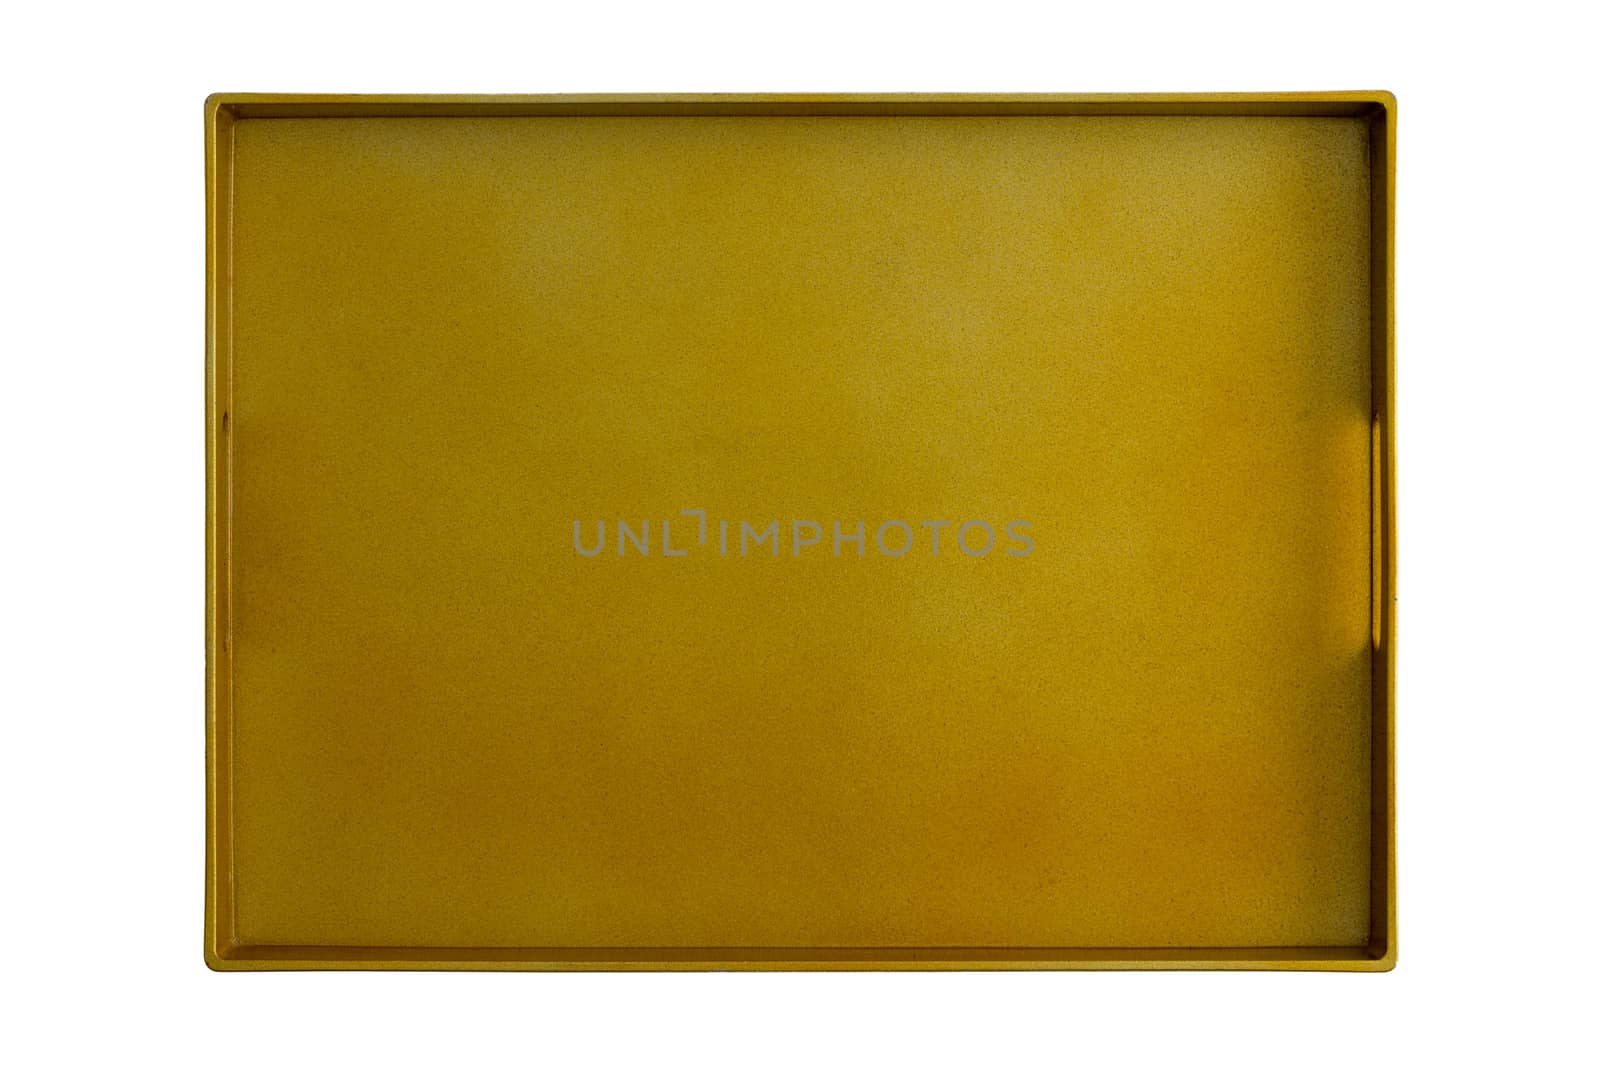 Above view of golden color isolated empty tray waiting to serve foods and drinks, isolated on white.